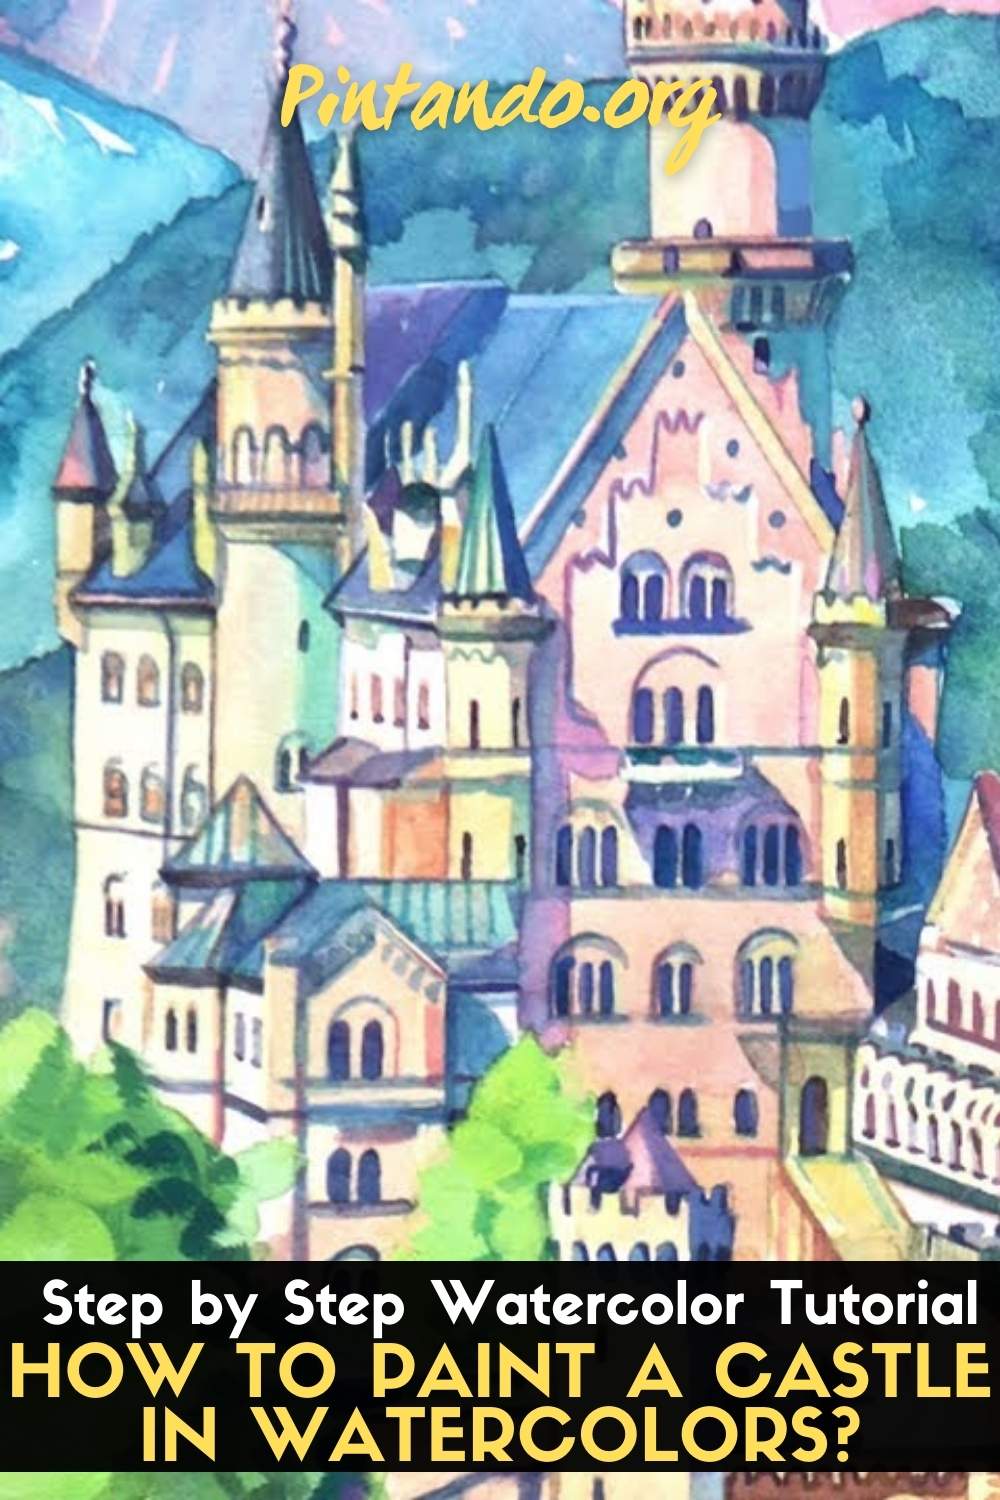 How to paint a Castle in Watercolors Step by Step Watercolor Tutoria (2)